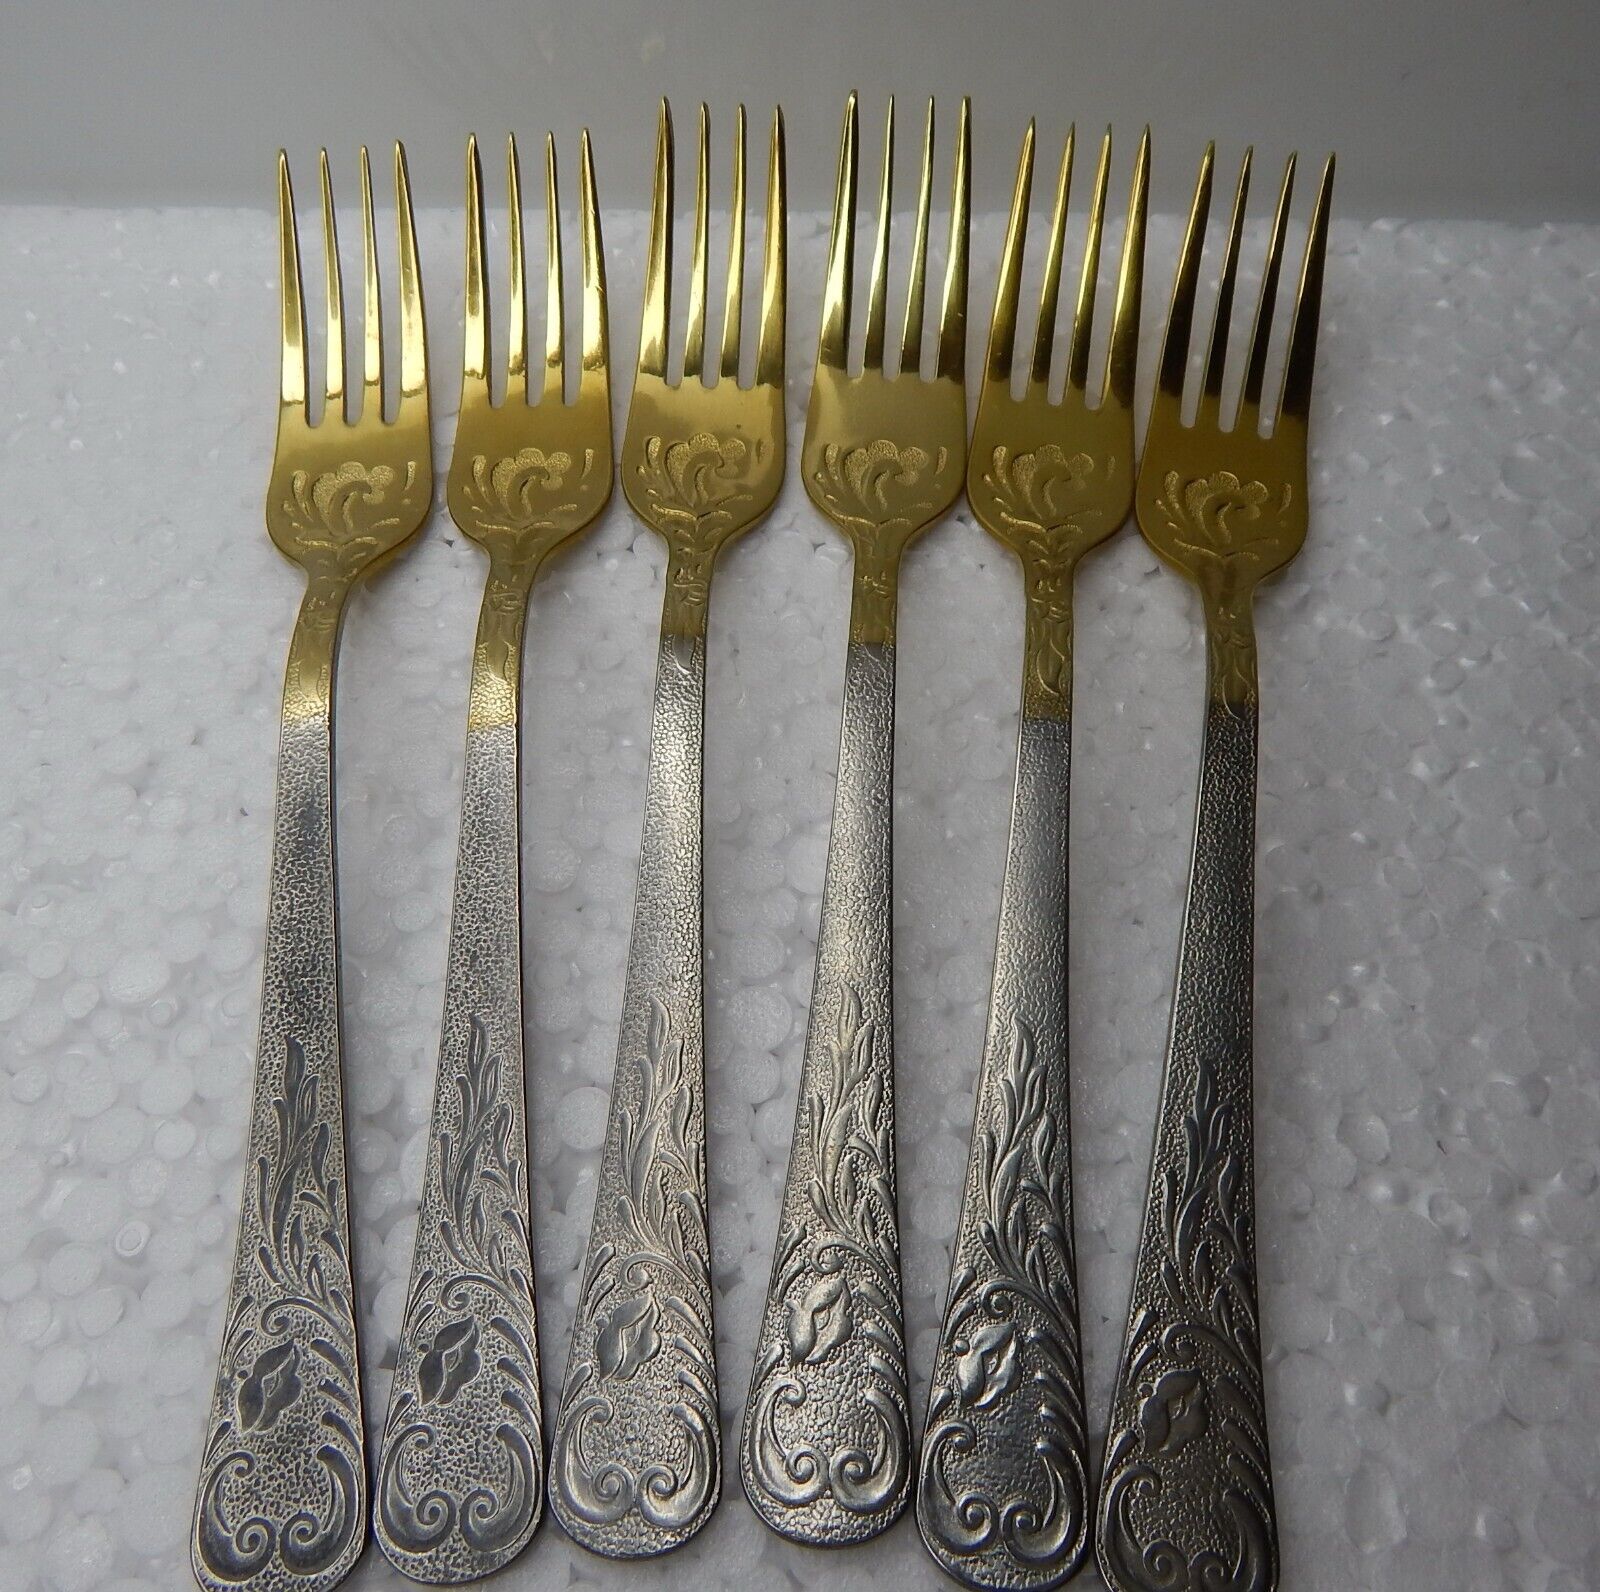 Vintage Gold Plated Table Forks 6 pcs, Soviet USSR Stainless Steel